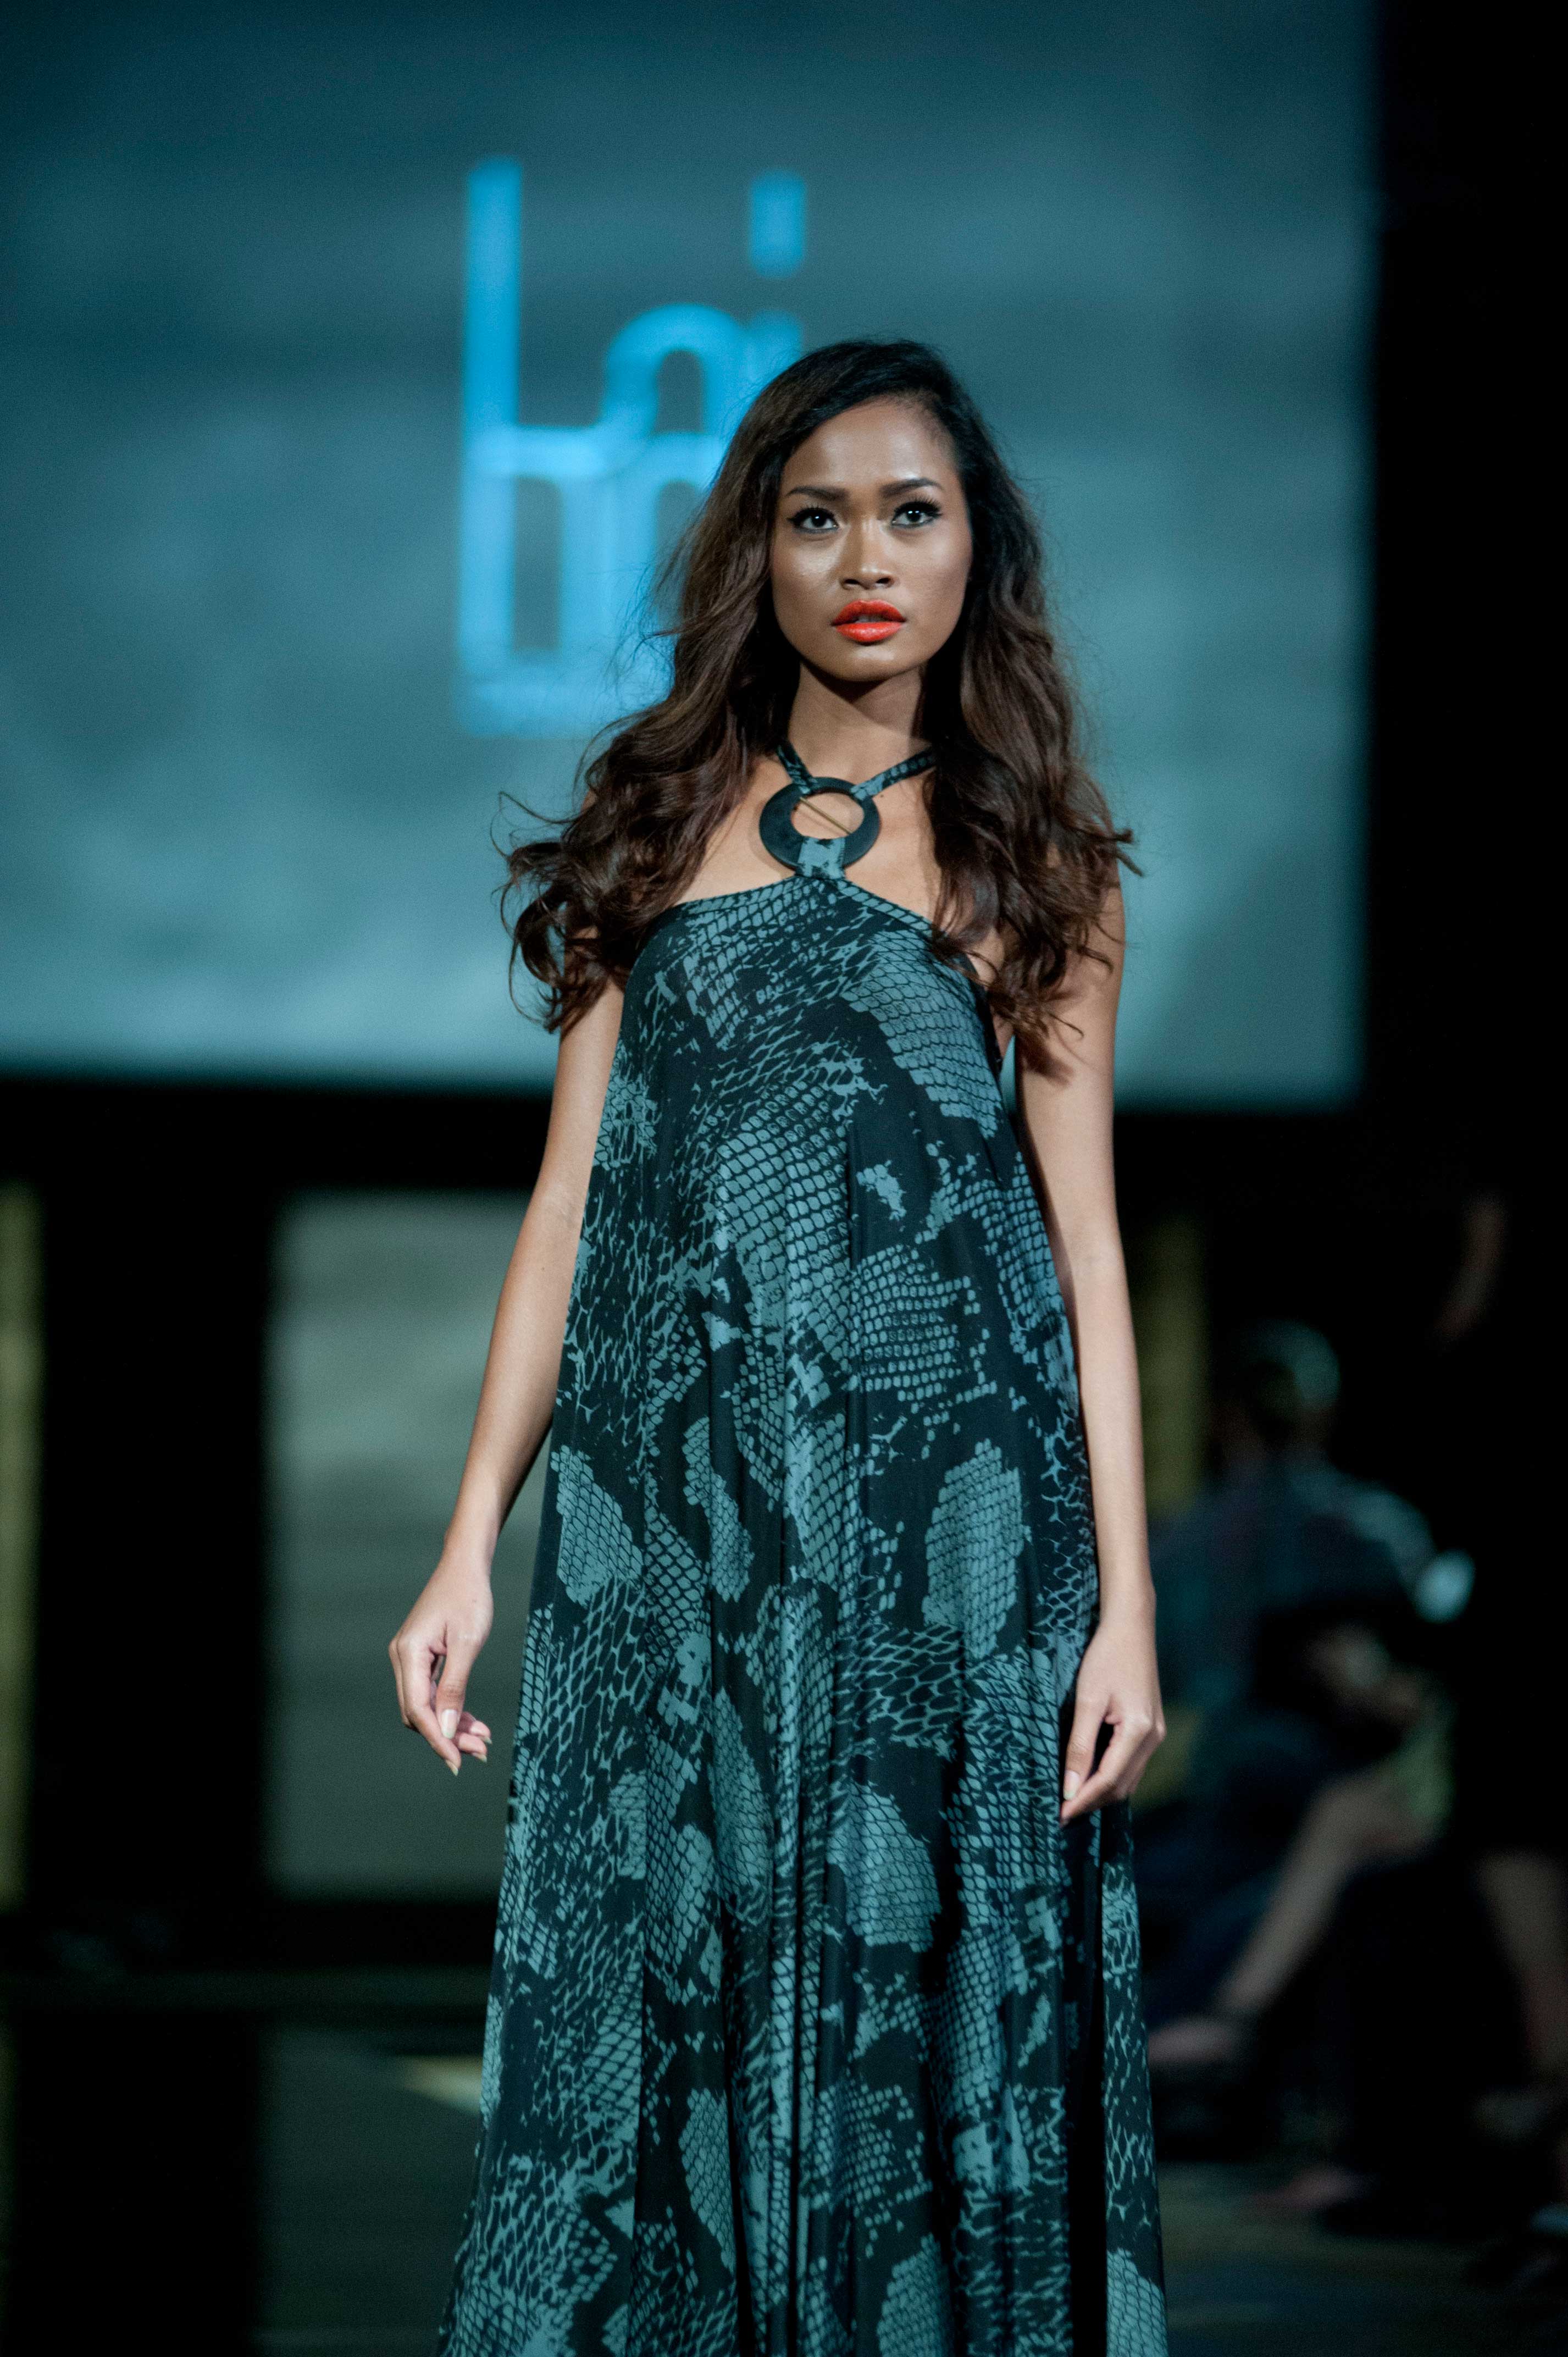 The KajFAB safari of the Kaj Resort collection, Tribu Sauvage, featured on the catwalk at the inaugural Fashion Festival Bali in August 2013 at the luxurious Stones Hotel in Bali’s Legian region. Featured is Kaj’s maxi dress with ring accent. Photo courtesy Anggara Mahendra.